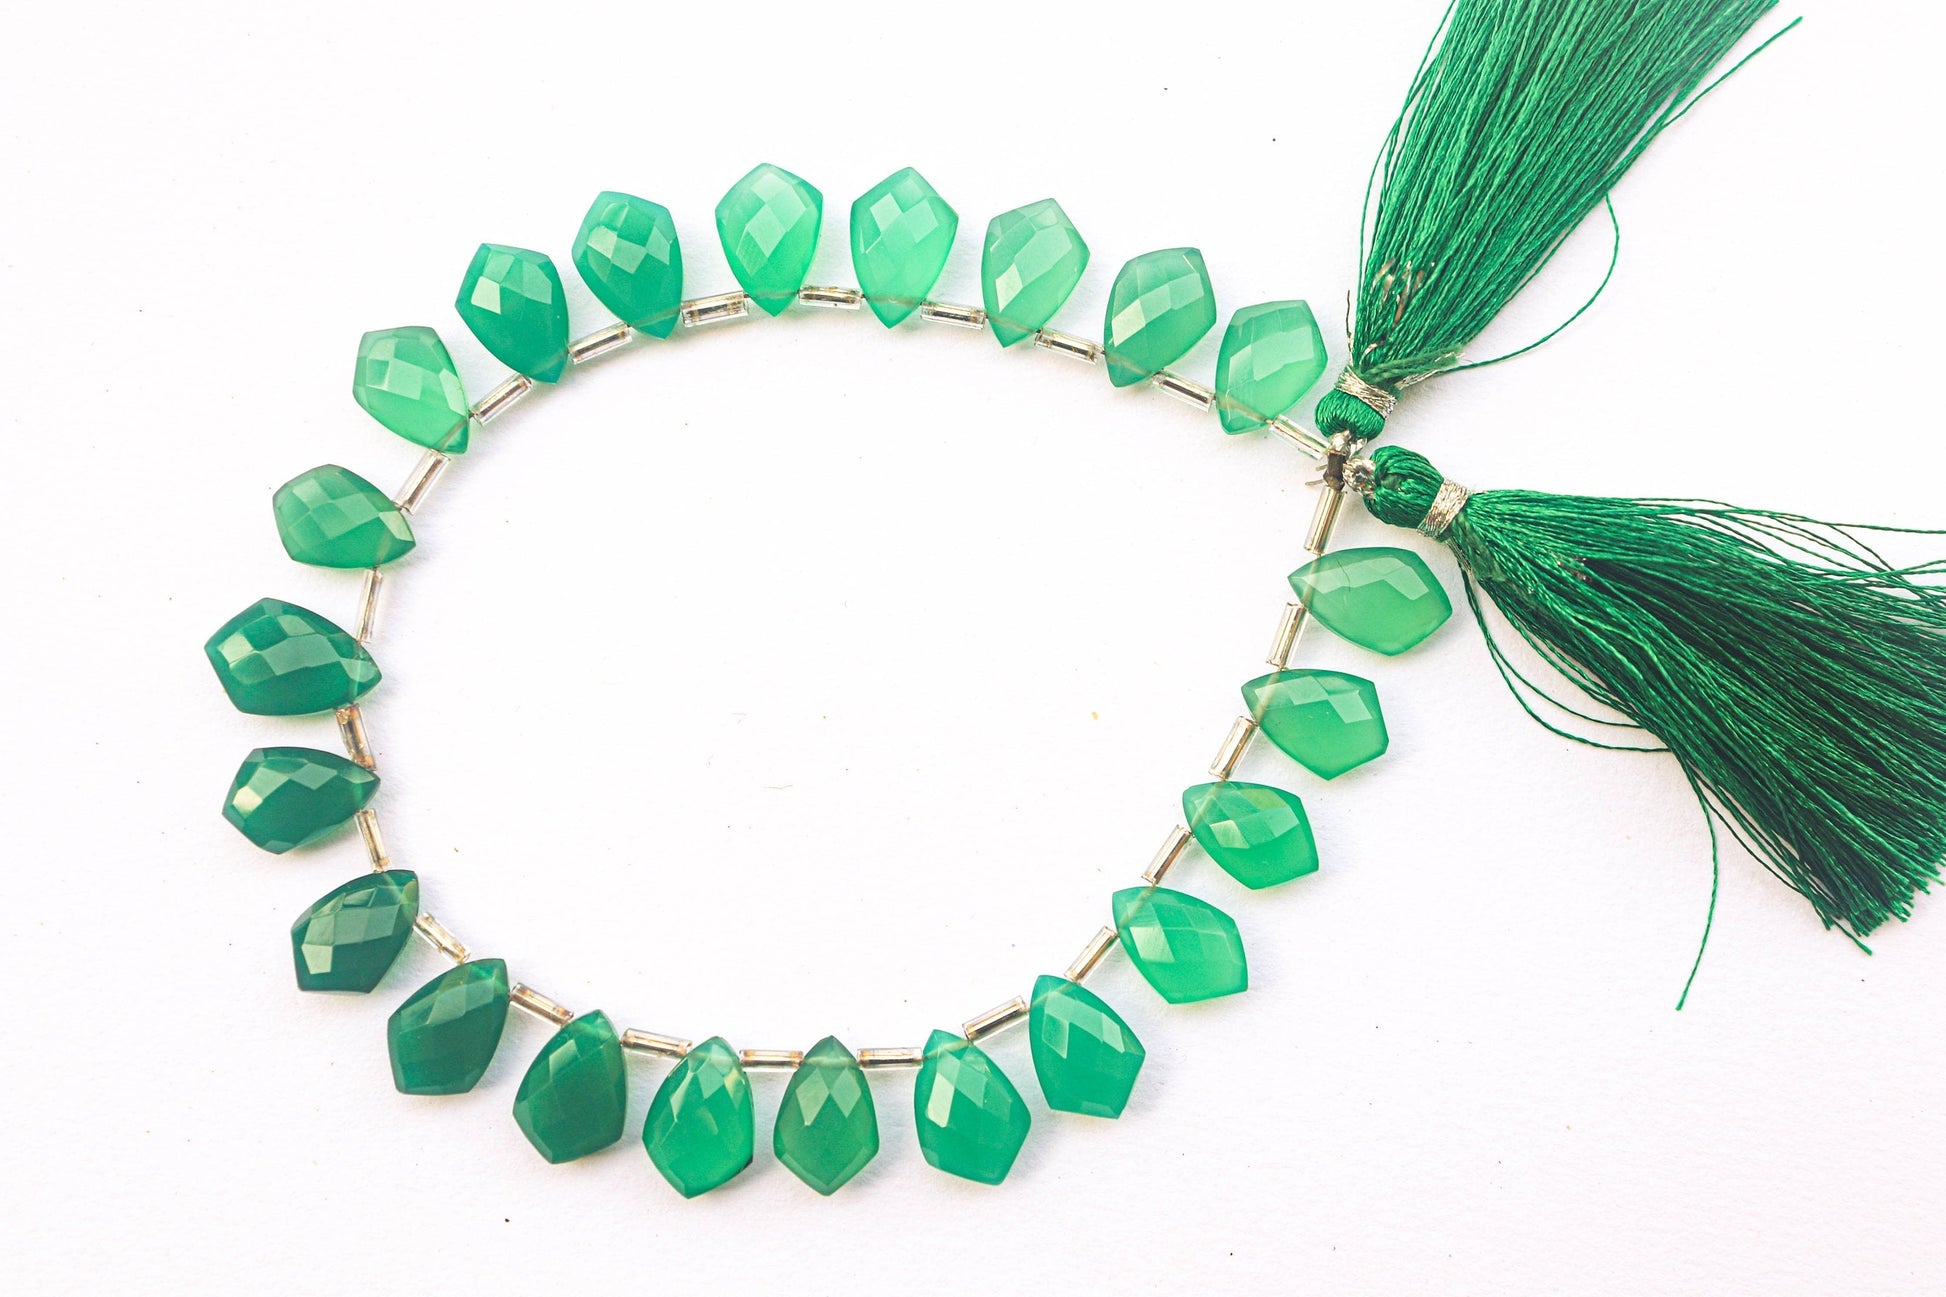 Green Onyx Fancy Shape Faceted Briolette | 8x12mm | 22 Pieces Strand | Beadsforyourjewelry Beadsforyourjewelry